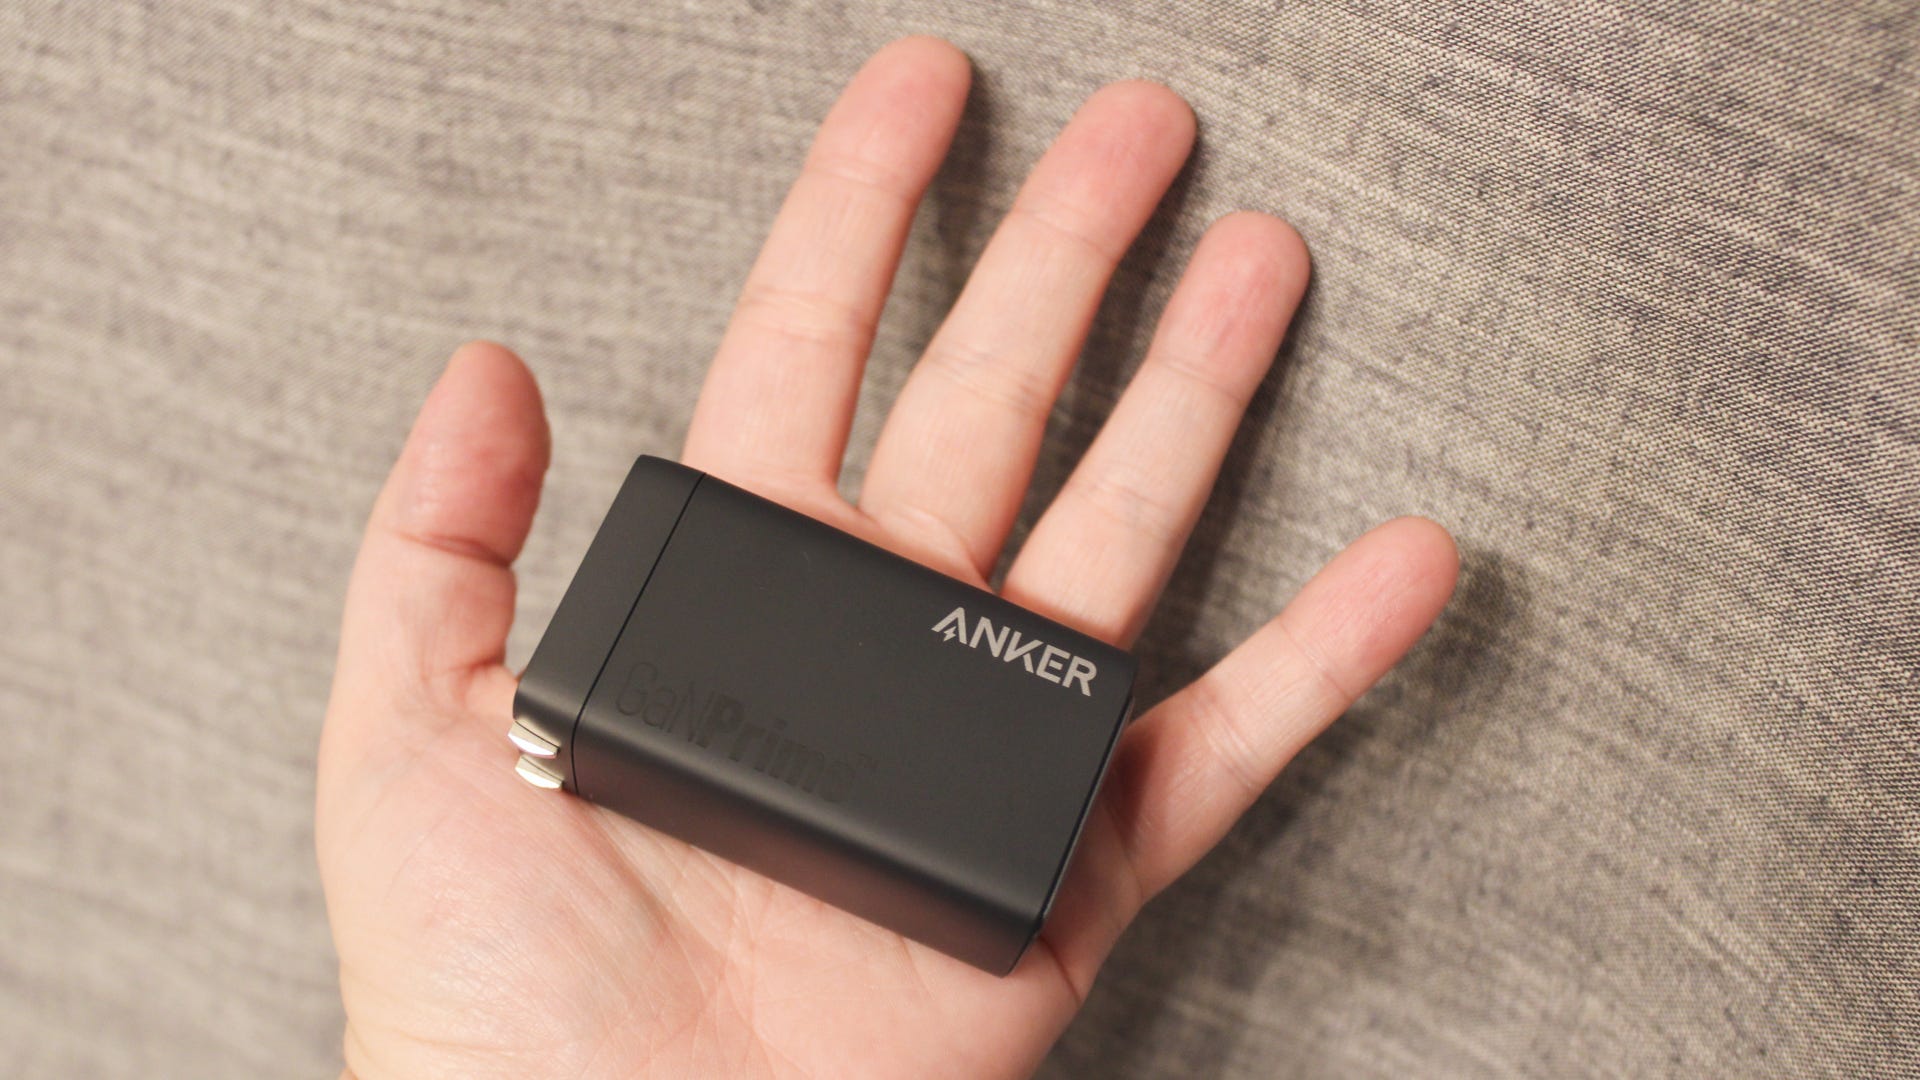 Anker 735 charger in palm of a hand